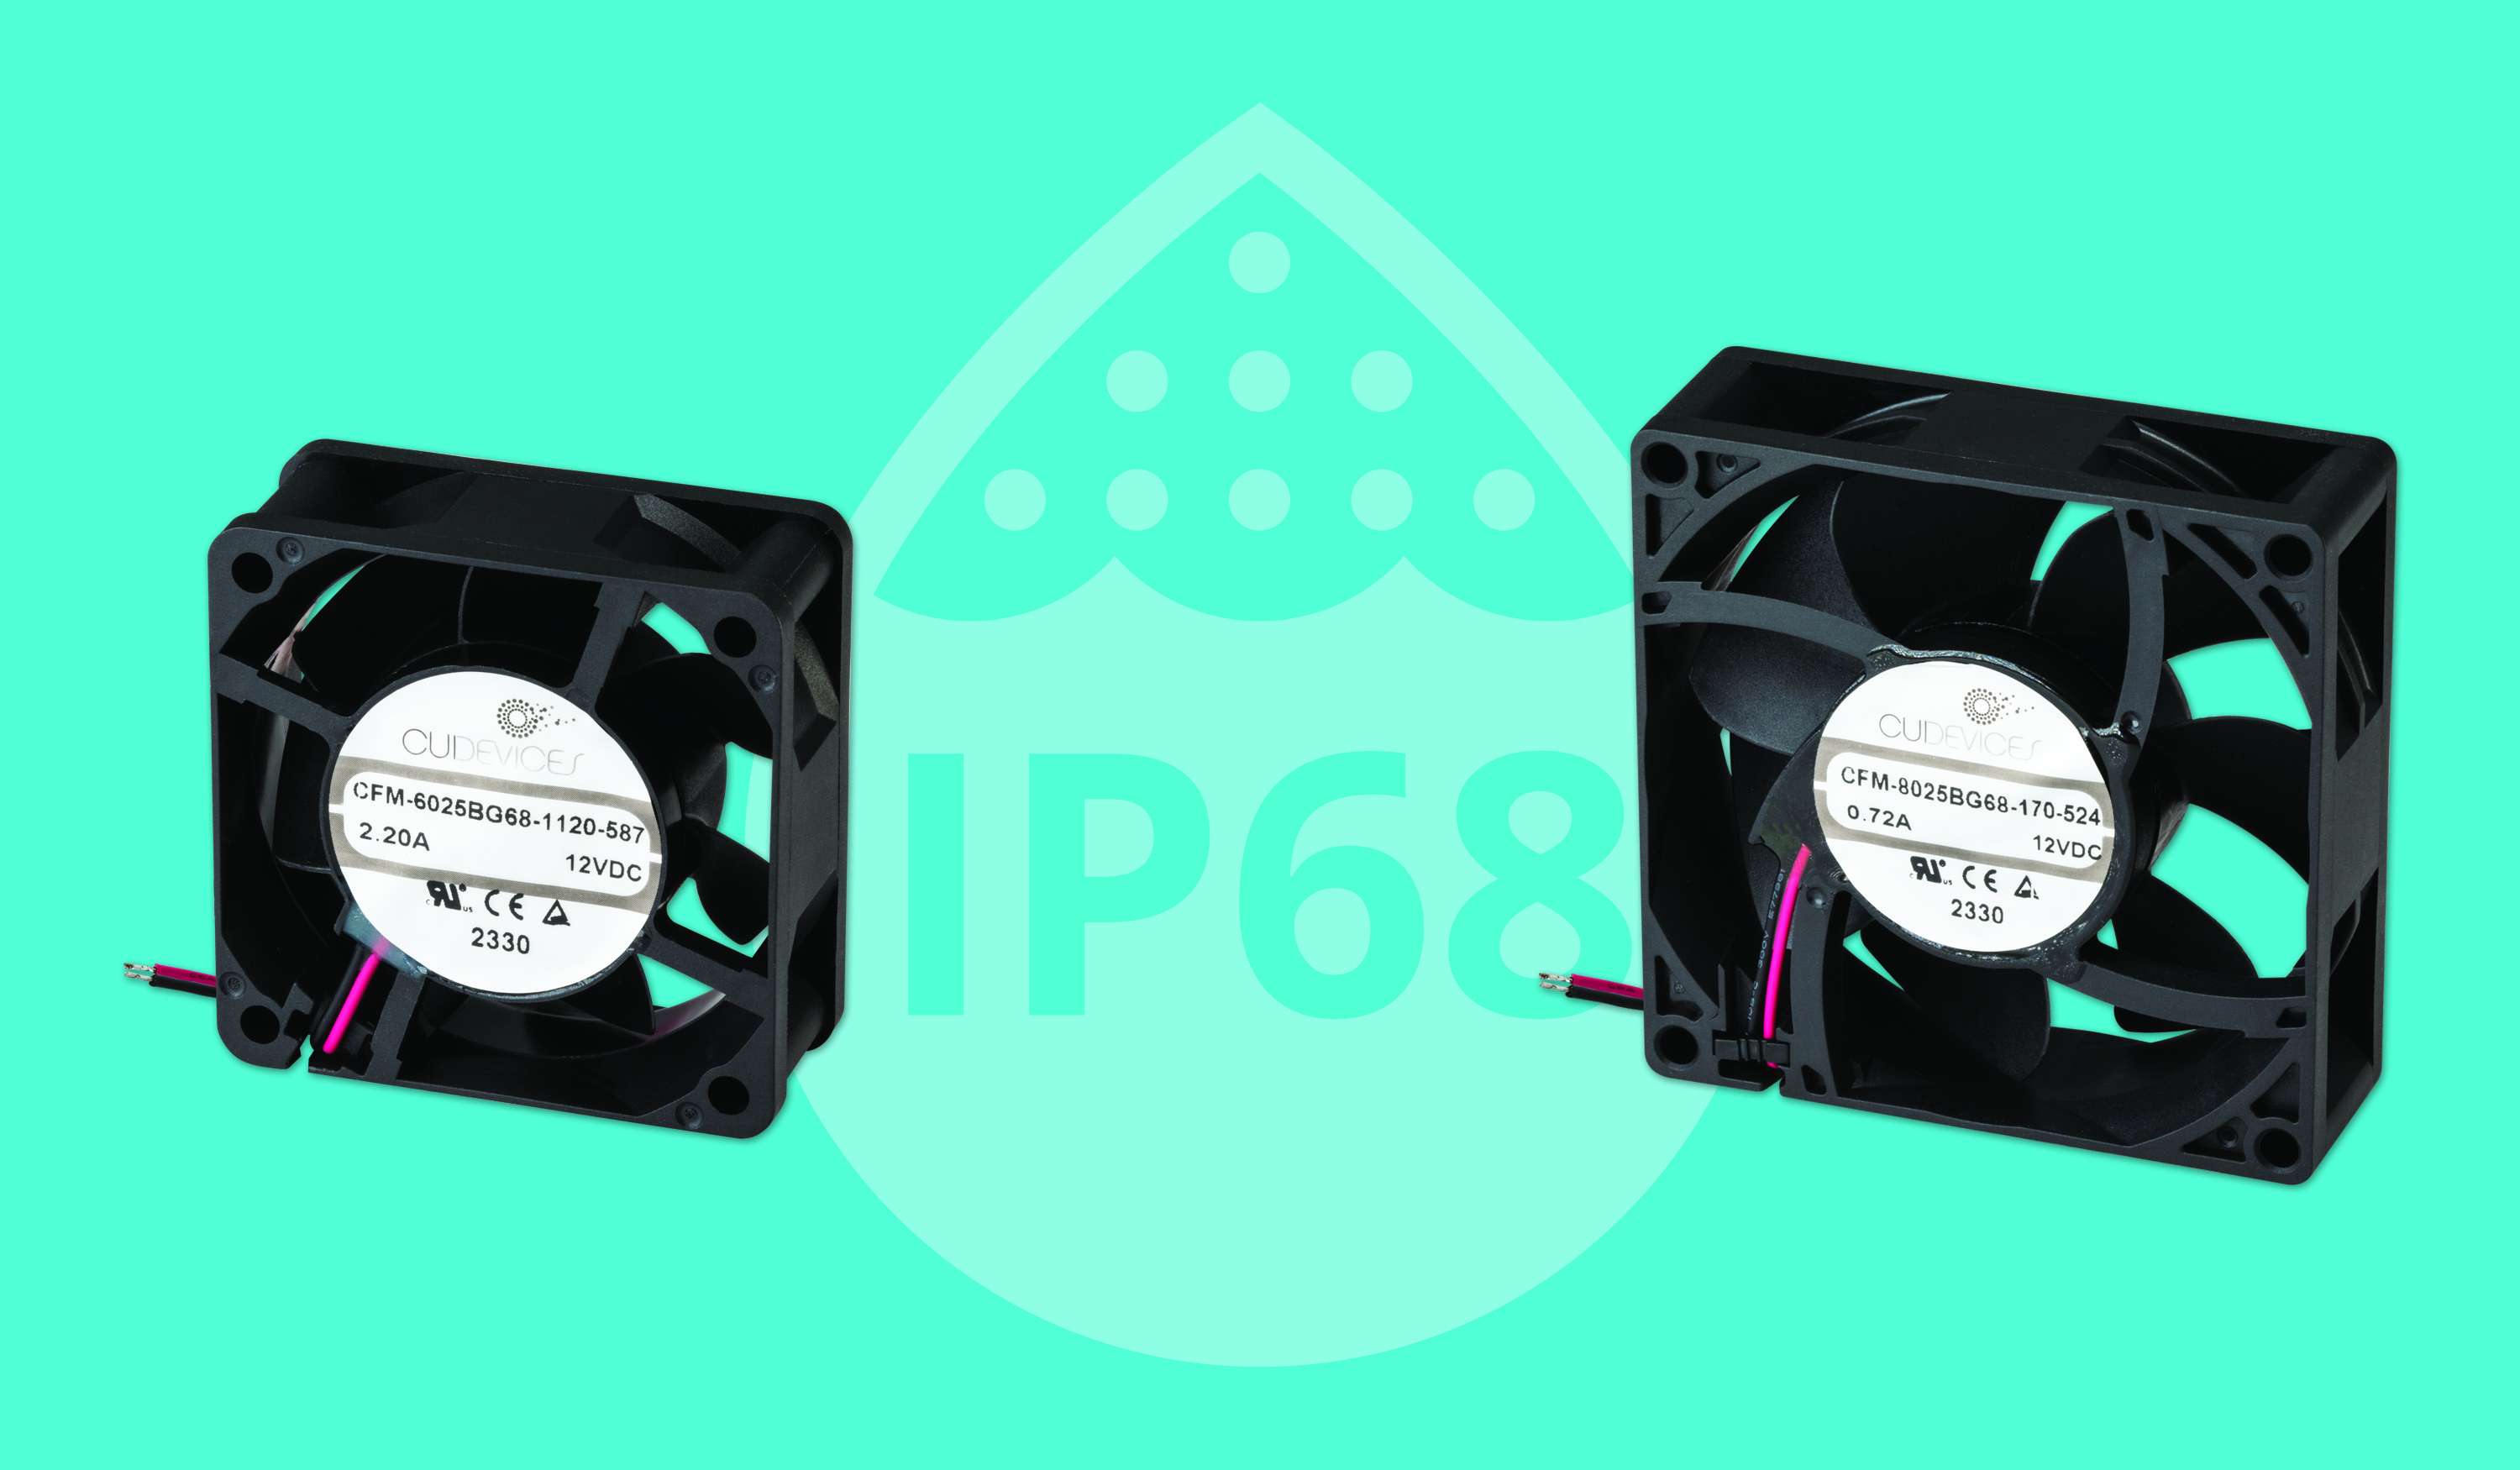 IP68-Rated Models Added to CUI Devices' DC Fans Line